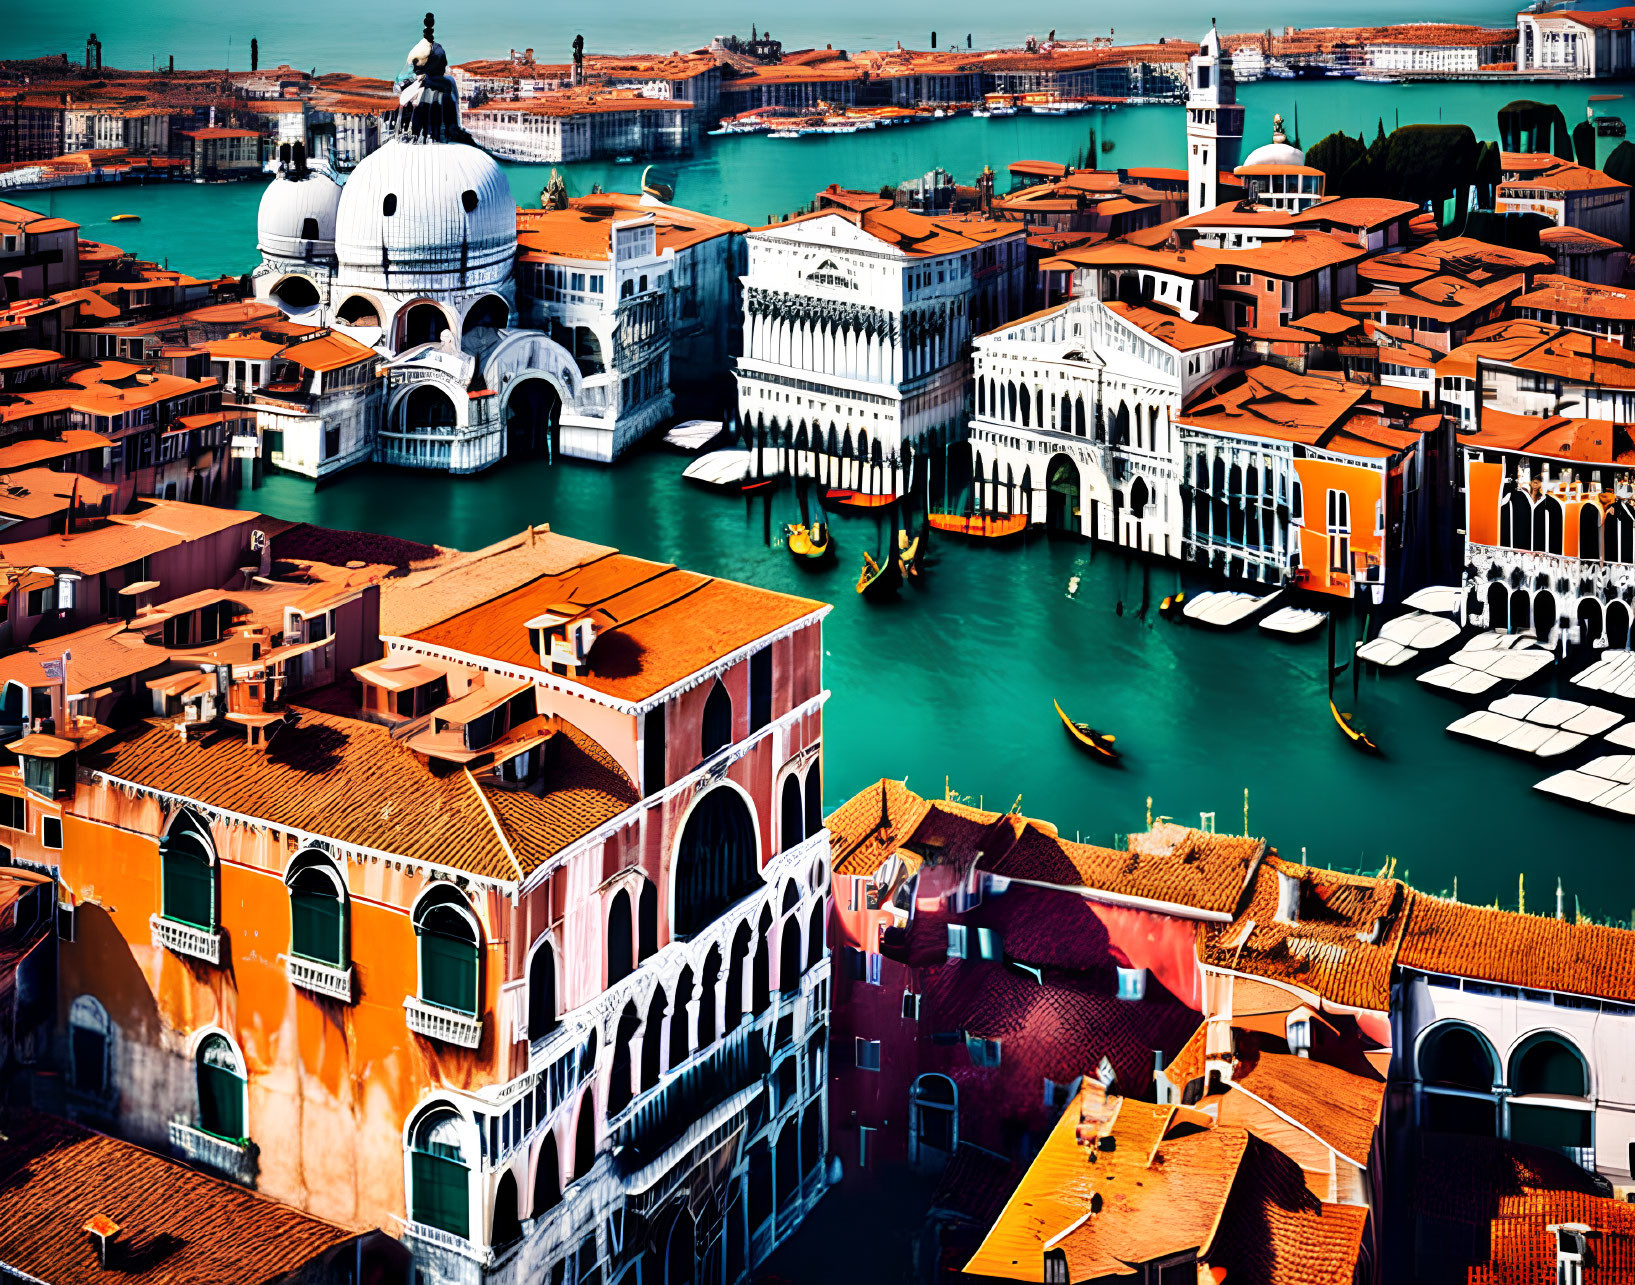 Aerial view of Venice canals, gondolas, and historic red-orange architecture